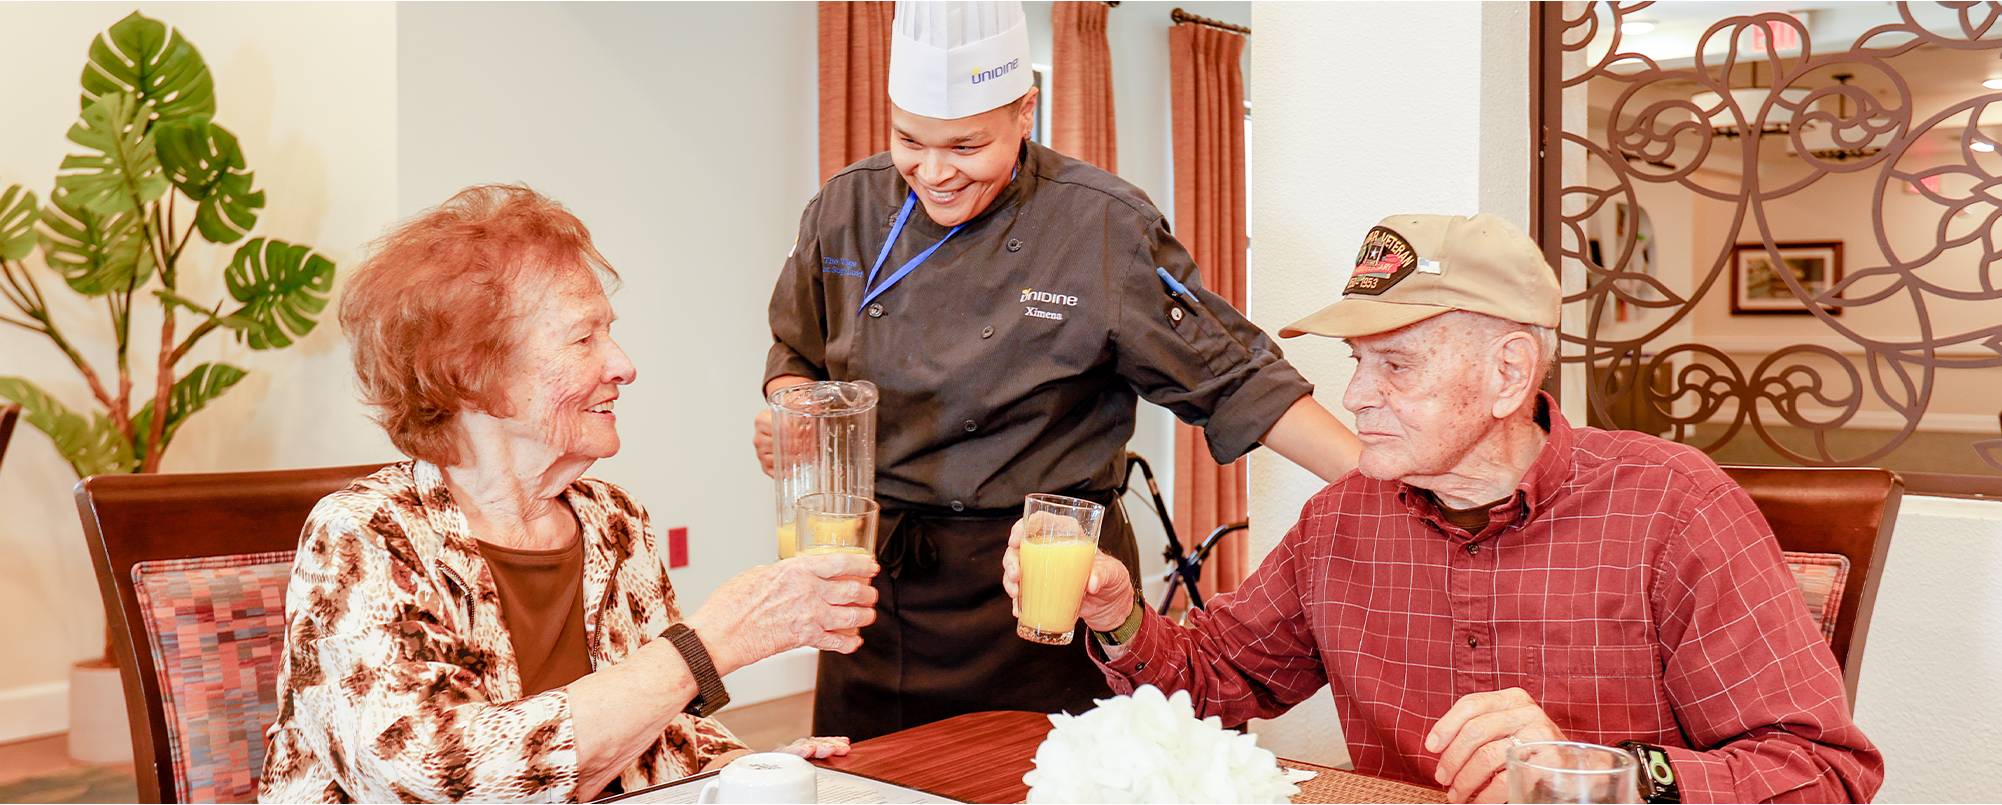 A chef is serving two people drinks at the table.